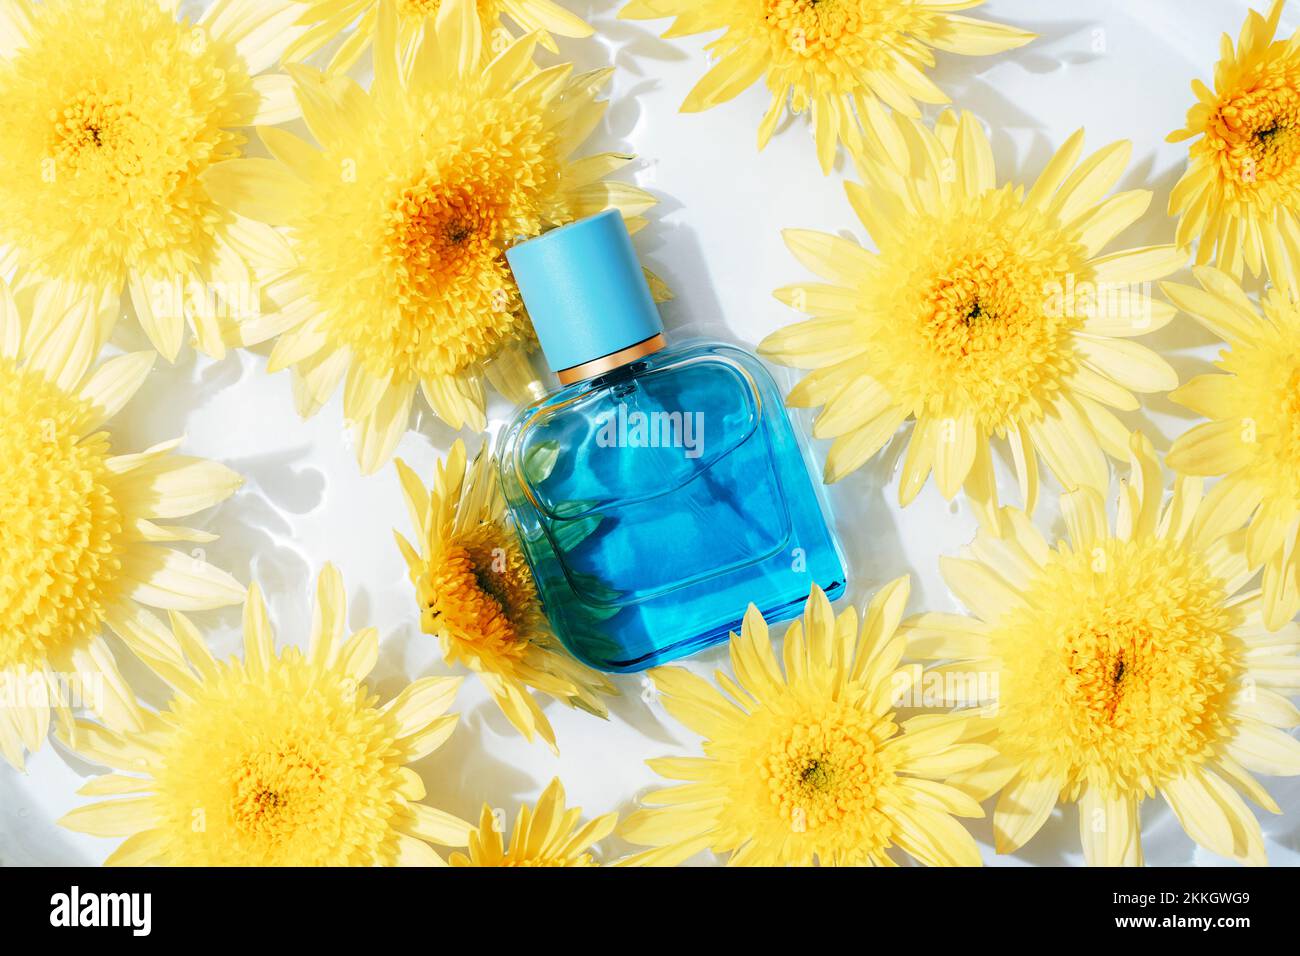 Blue perfume bottle on water background with yellow chrysanthemum flowers. Top view, flat lay. Stock Photo